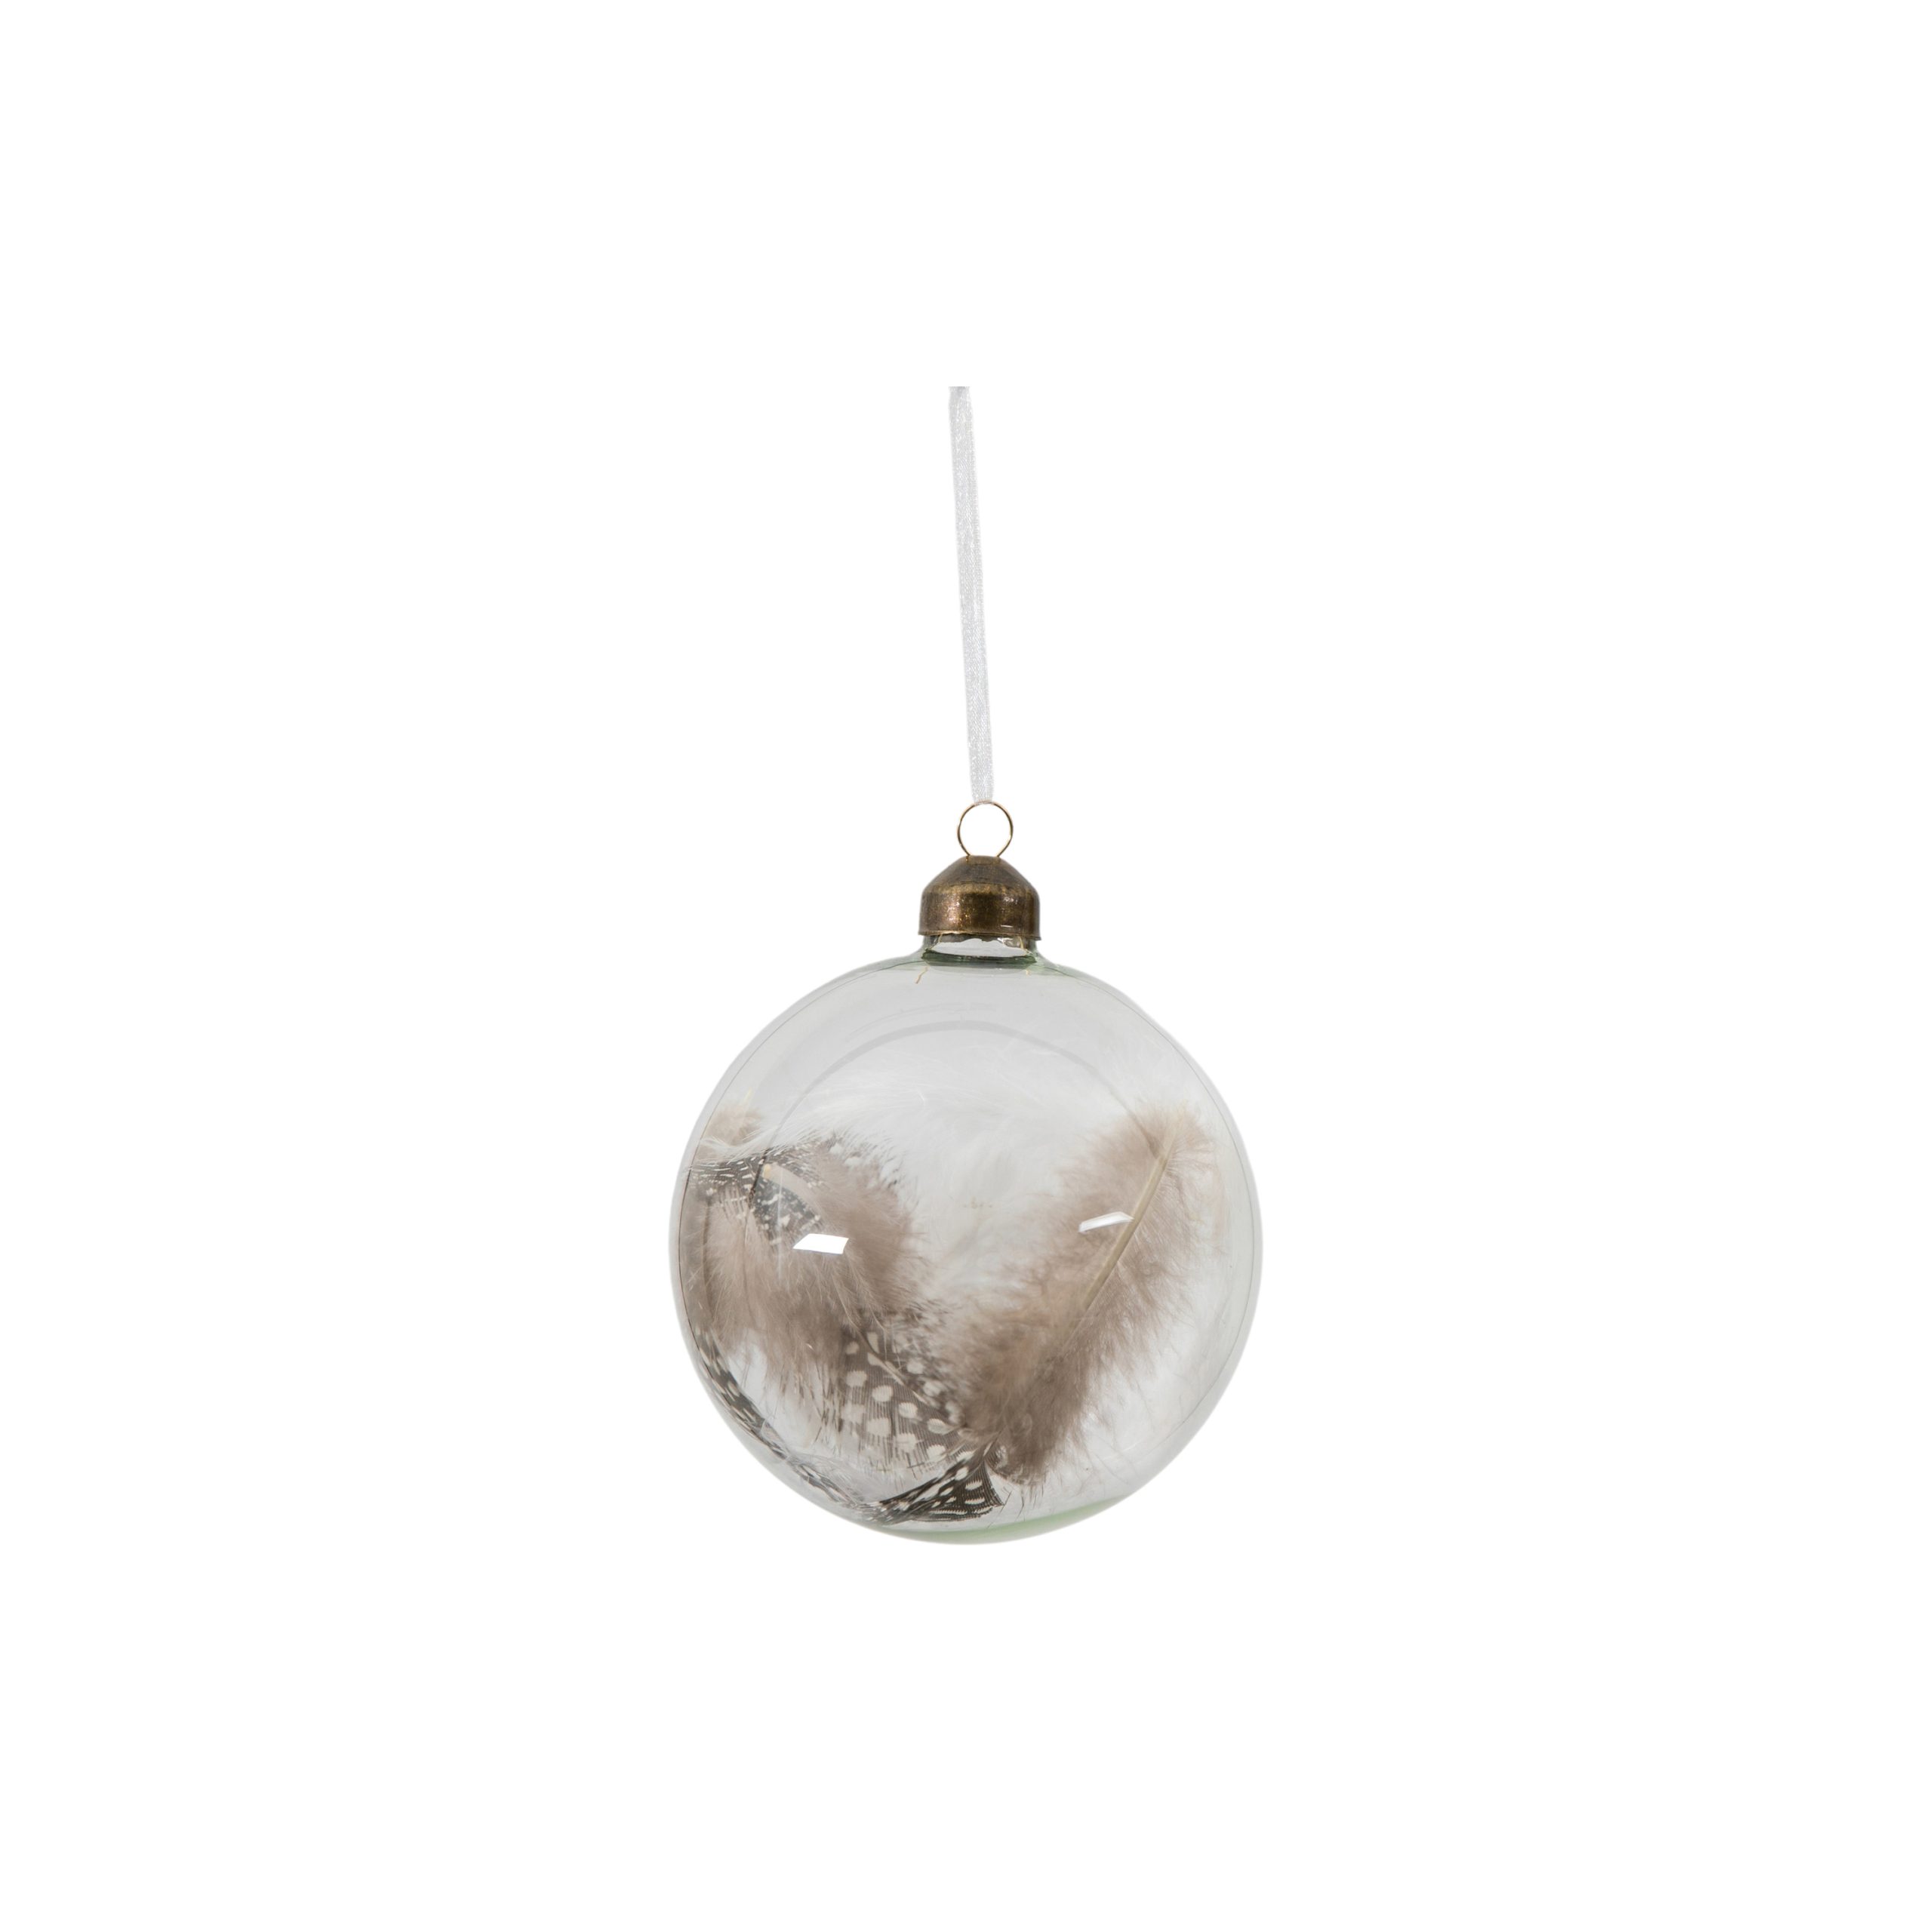 Gallery Direct Feather Bauble White/Natural (Set of 3)